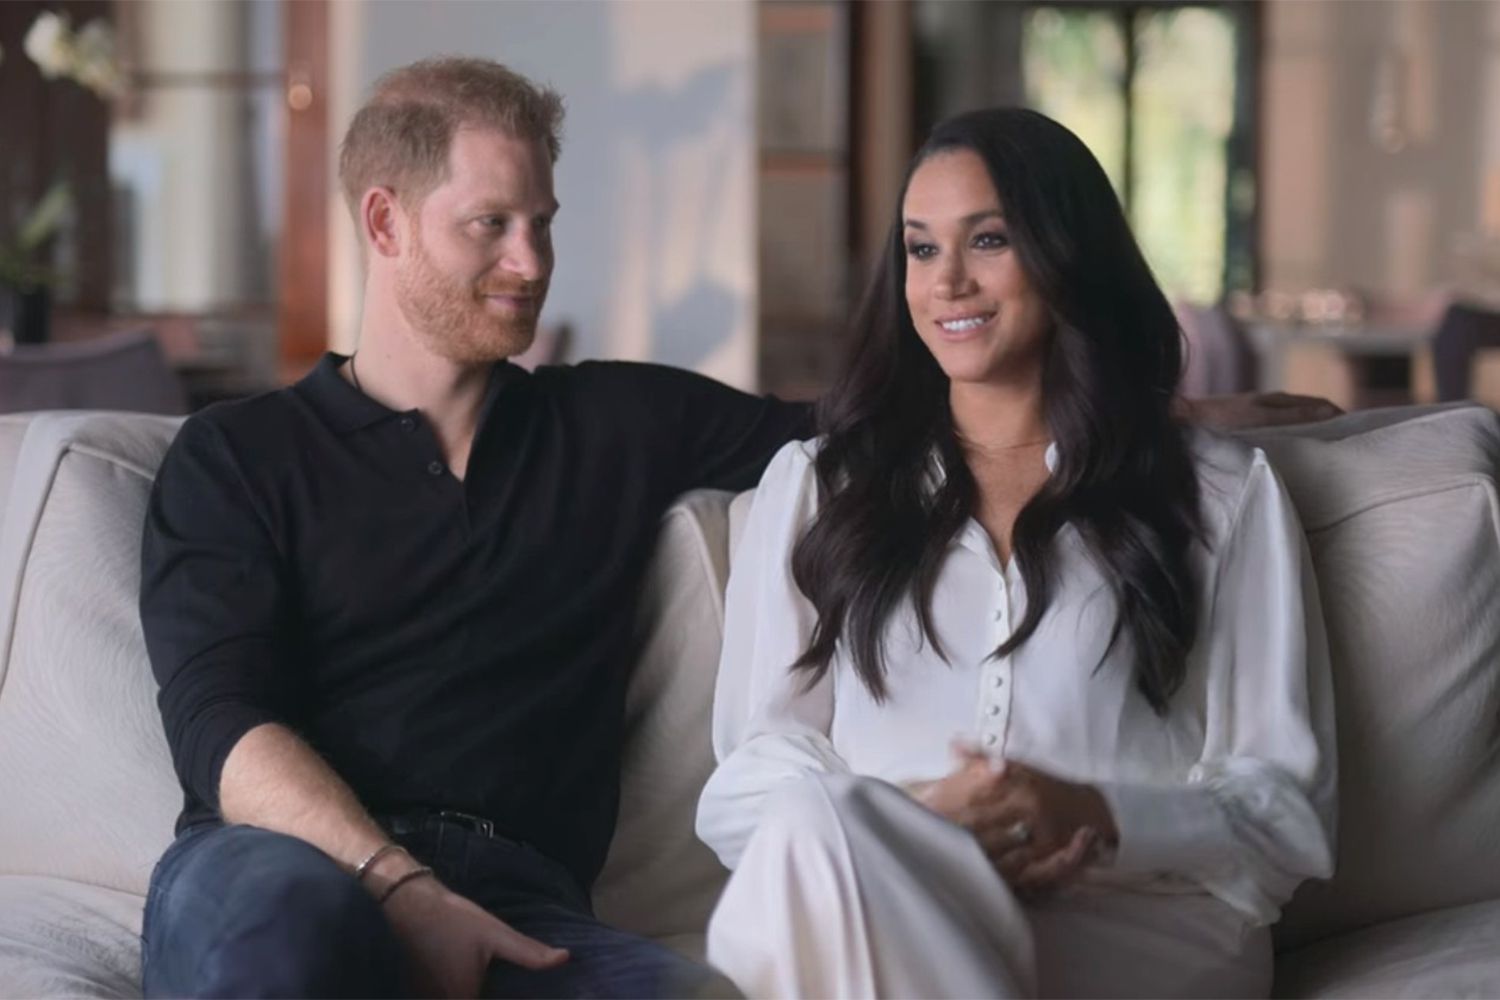 Prince Harry Claims Meghan Markle's Dad's Leaked Letter Caused Her Miscarriage